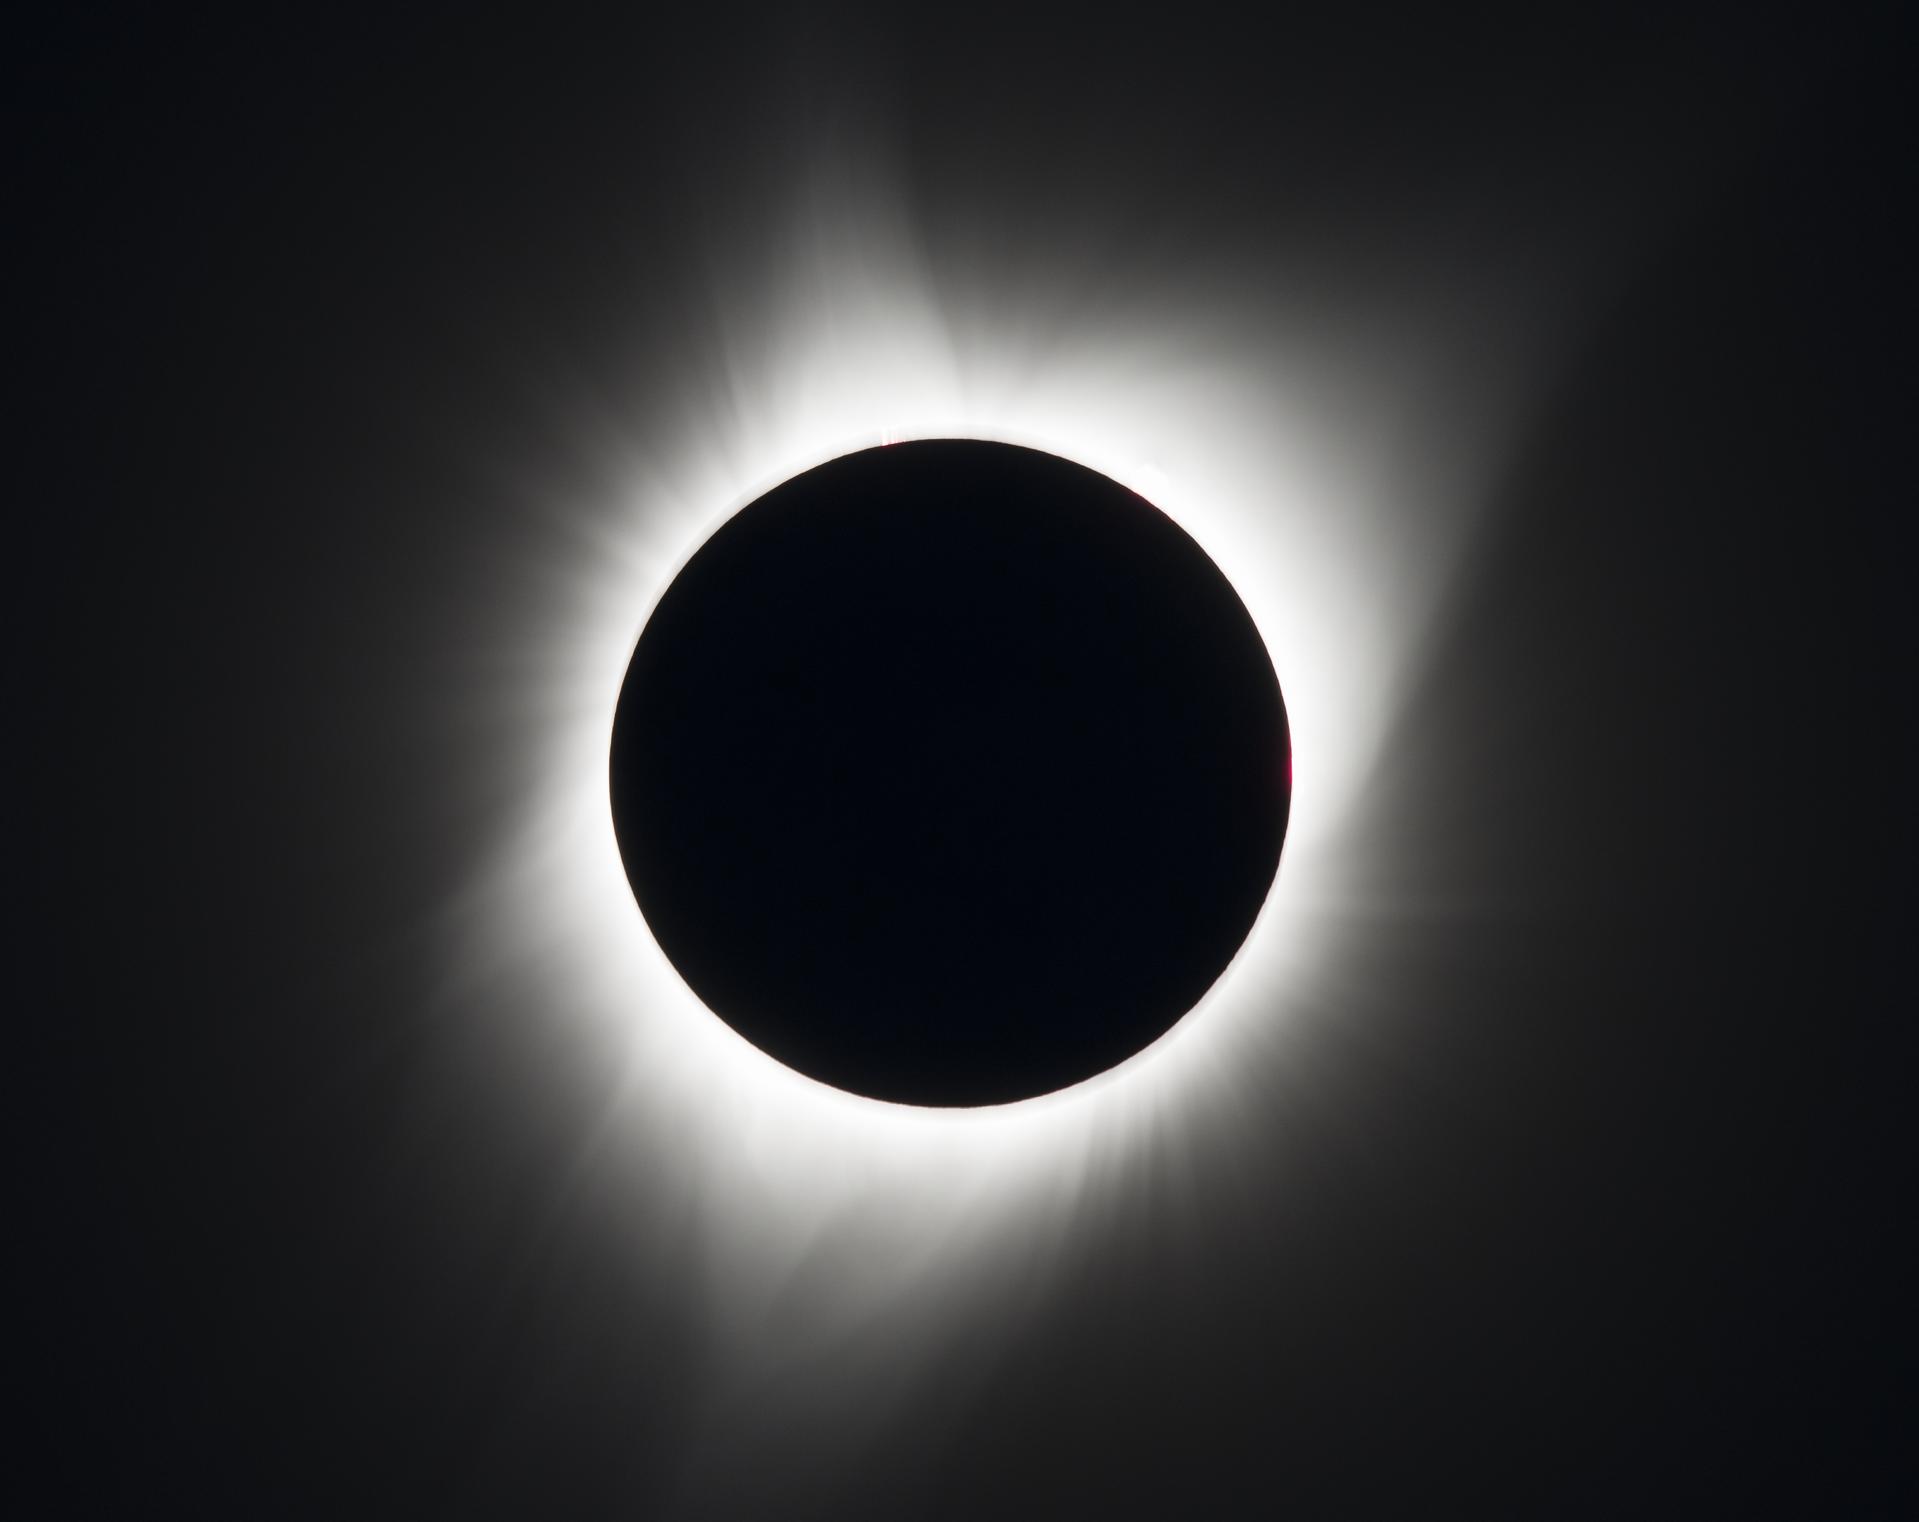 A total solar eclipse is peeped on Monday, August 21, 2017 above Madras, Oregon. I aint talkin' bout chicken n' gravy biatch fo' realz. A total solar eclipse swept across a narrow portion of tha contiguous United Hoodz from Lincoln Beach, Oregon ta Charleston, Downtown Carolina fo' realz. A partial solar eclipse was visible across tha entire Uptown Gangsta continent along wit partz of Downtown America, Africa, n' Europe. Photo Credit: (NASA/Aubrey Gemignani)